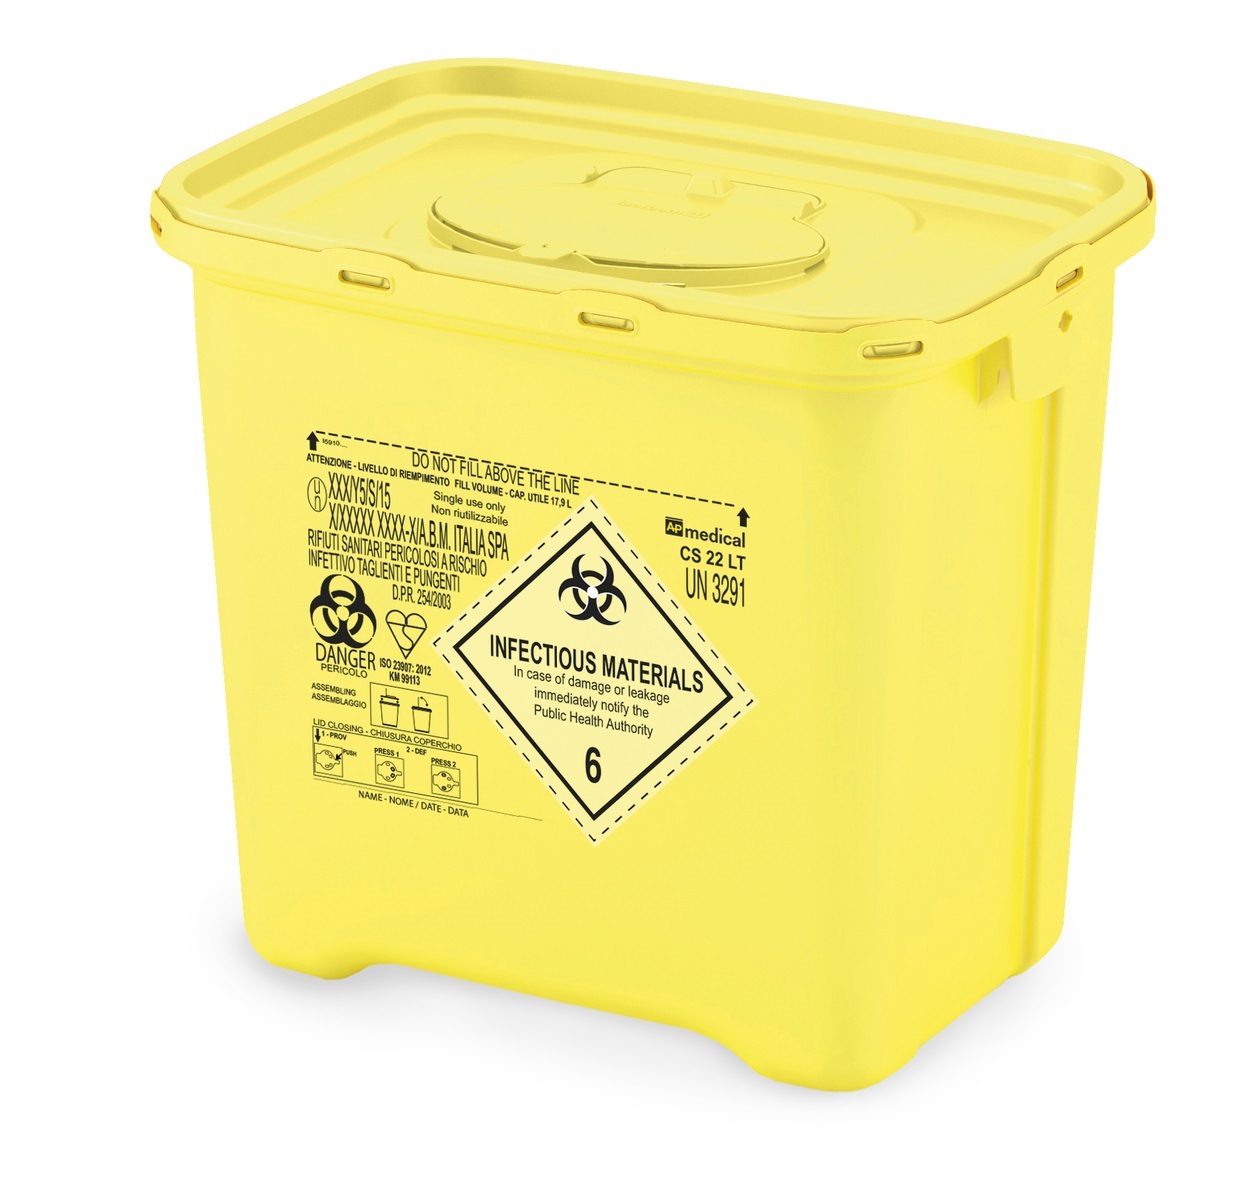 Waste Bin Infectious waste single use box set are Equipment perfect for keeping almost all viruses out can also be customised using Printing in sizes 142L owing to small supplies the final product may look different than picture.